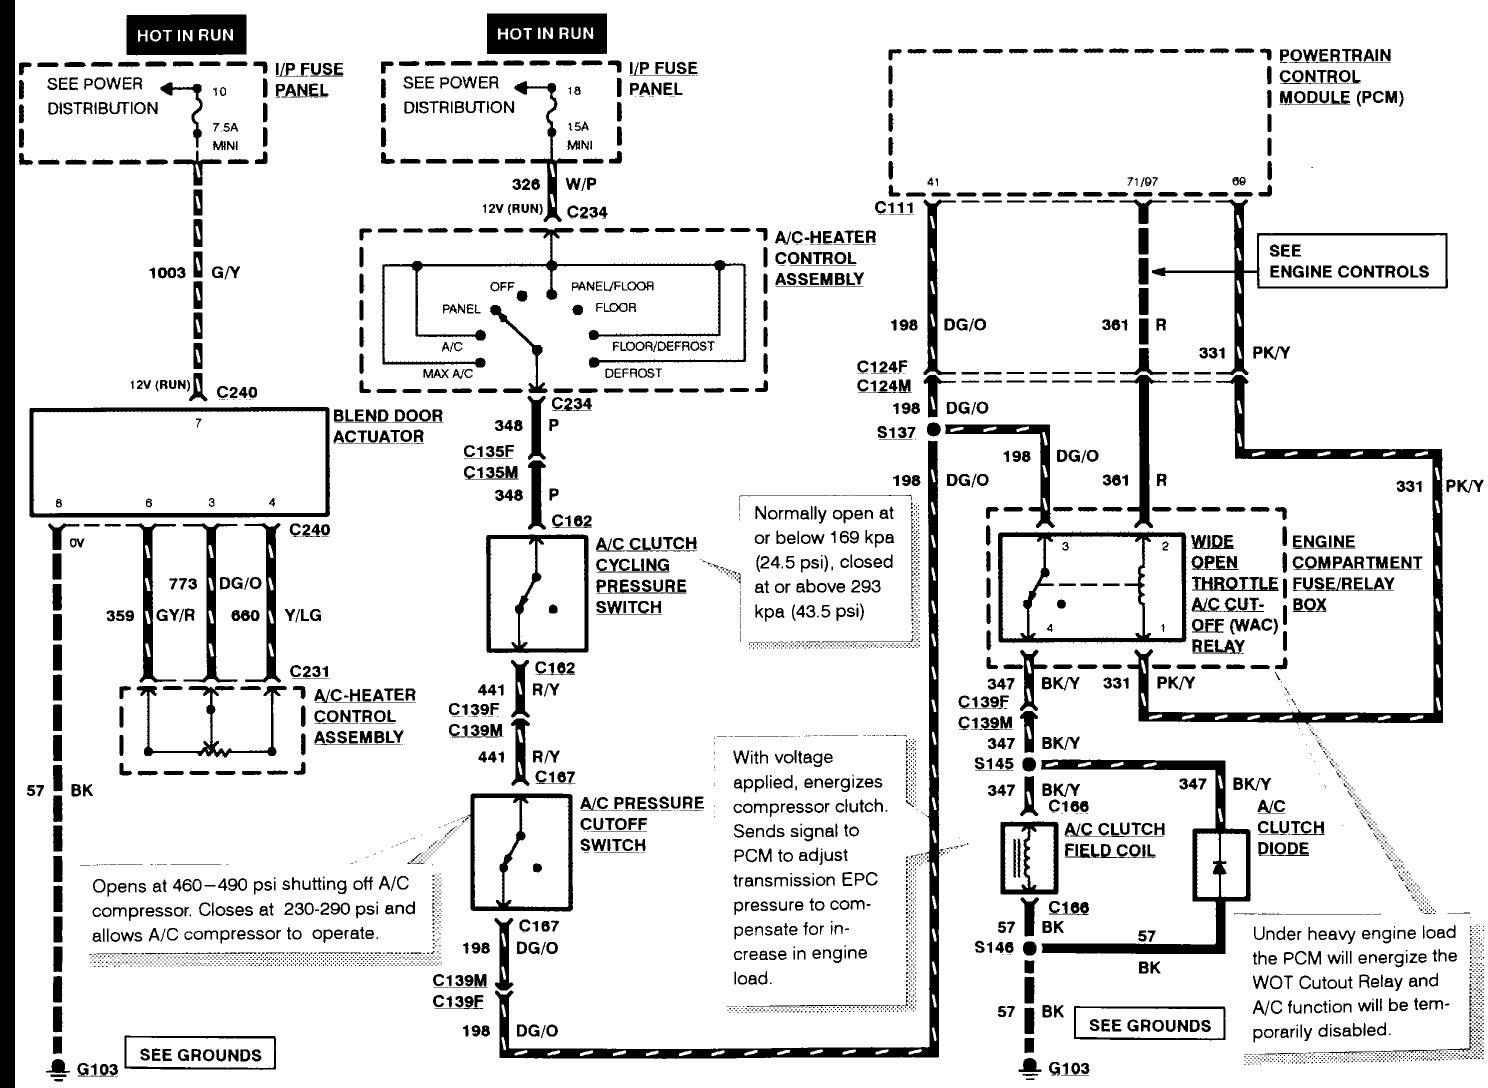 Lutron 3 Way Switch Wiring Diagram 1999 Ford F150 Fuel System Diagram Wiring Diagrams Interval